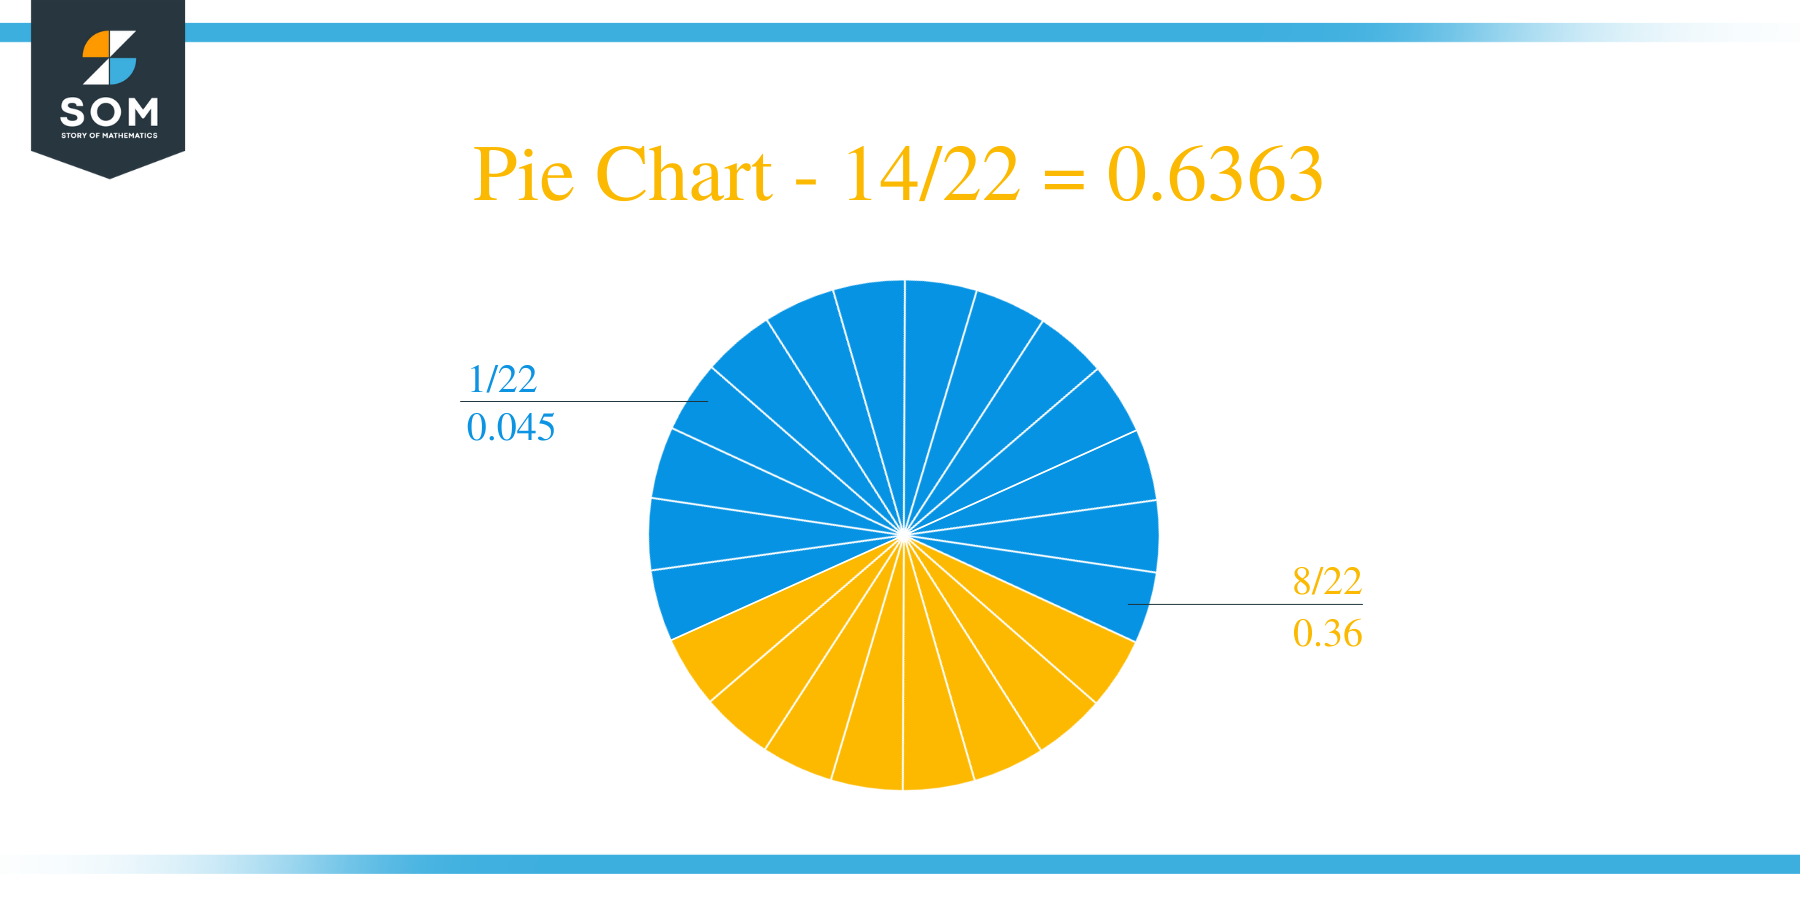 Pie Chart 14 by 22 Long Division Method